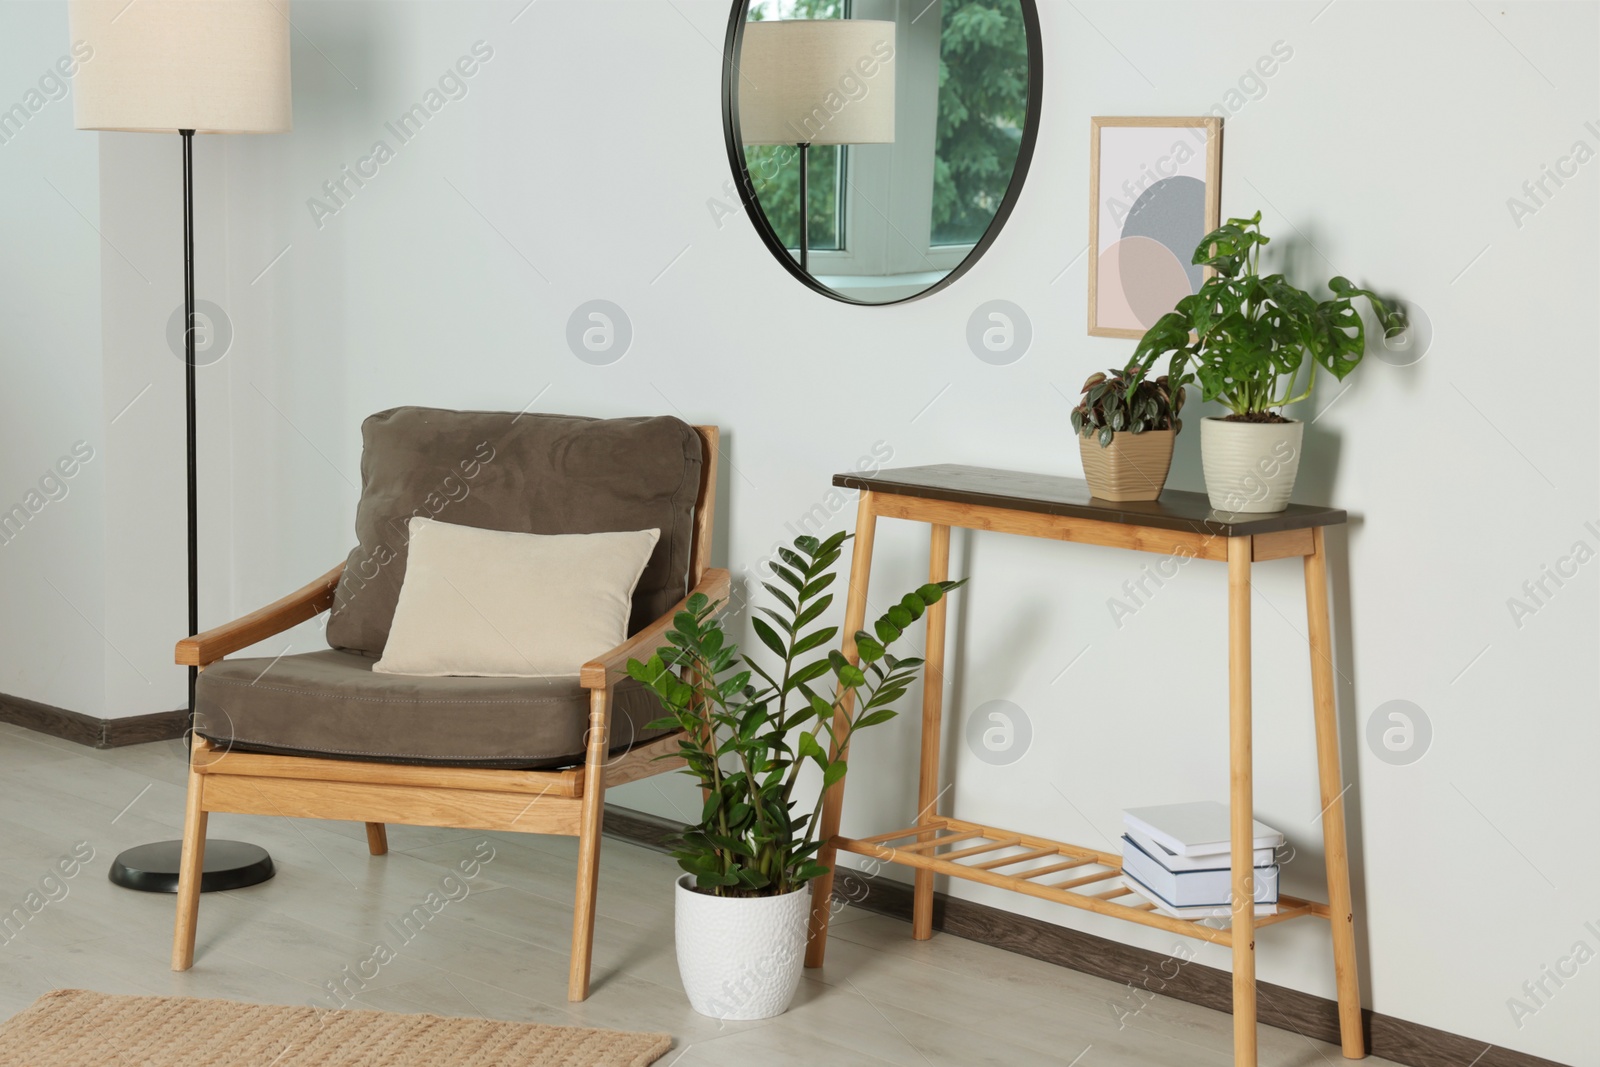 Photo of Stylish living room interior with wooden furniture, houseplants and round mirror on white wall